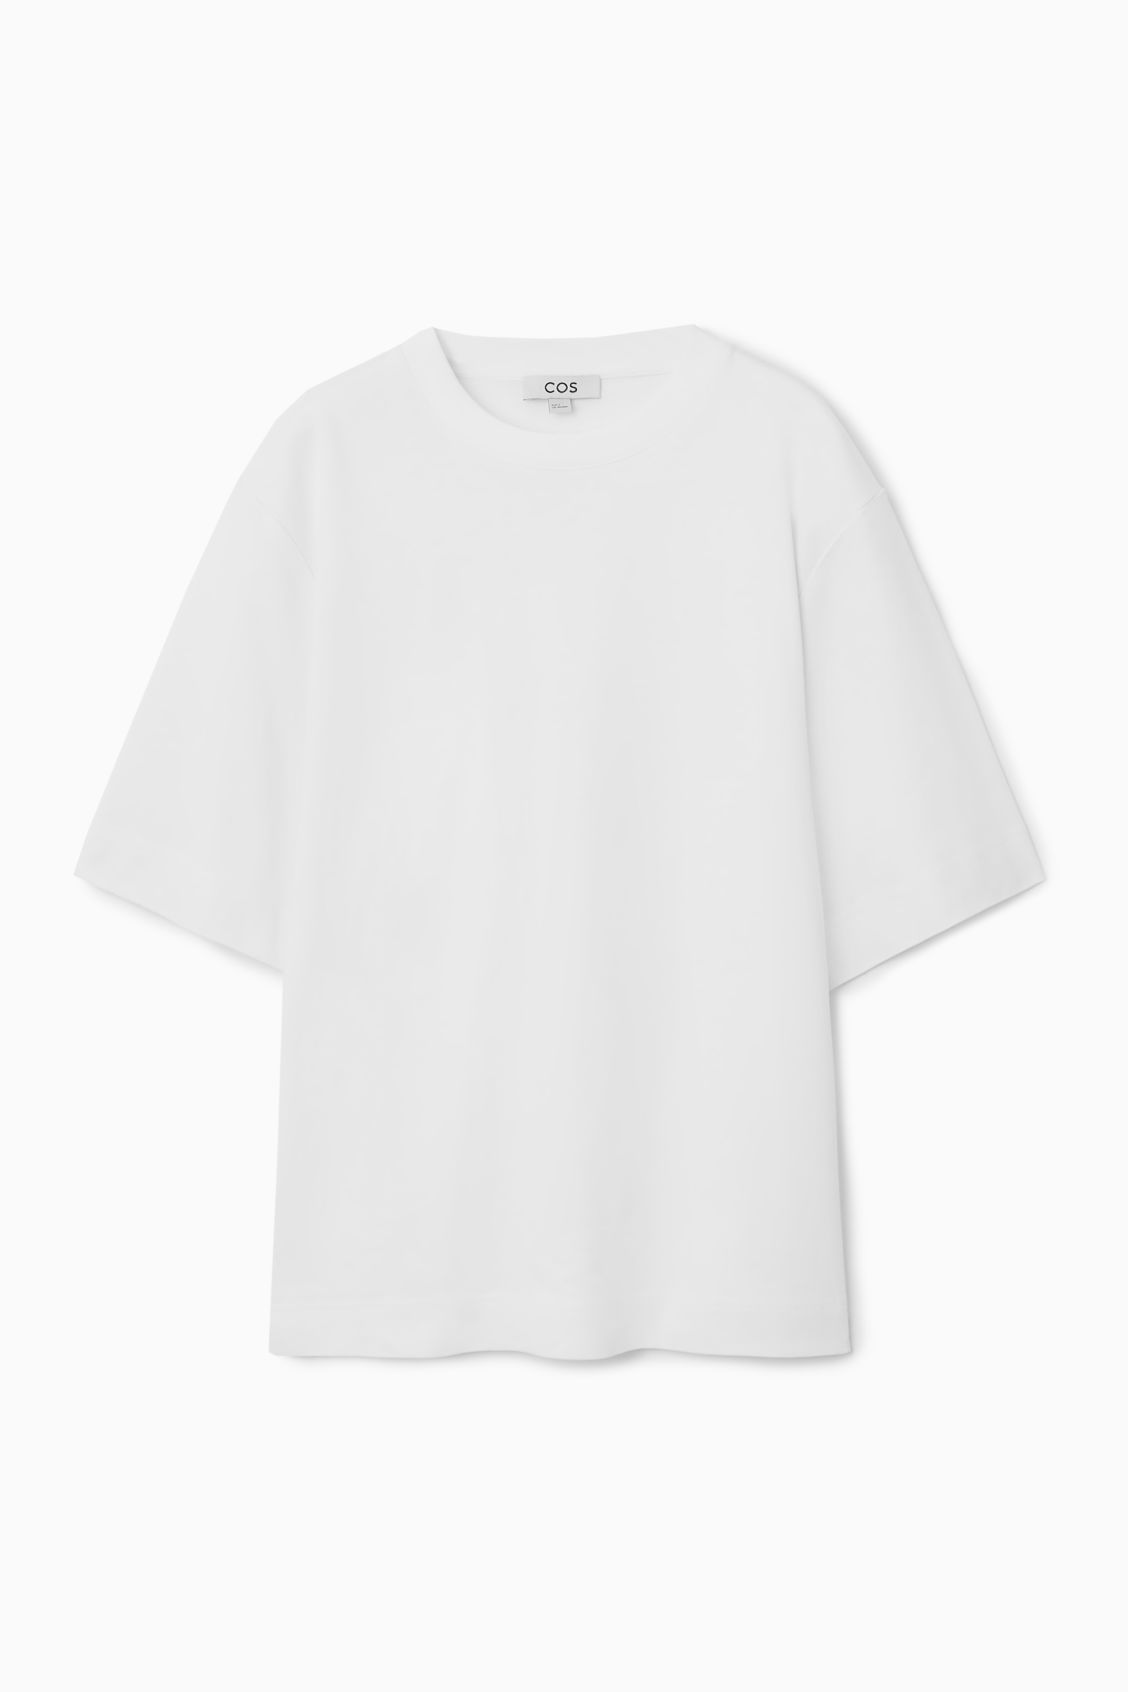 OVERSIZED T-SHIRT - WHITE - Tops - COS | COS (US)